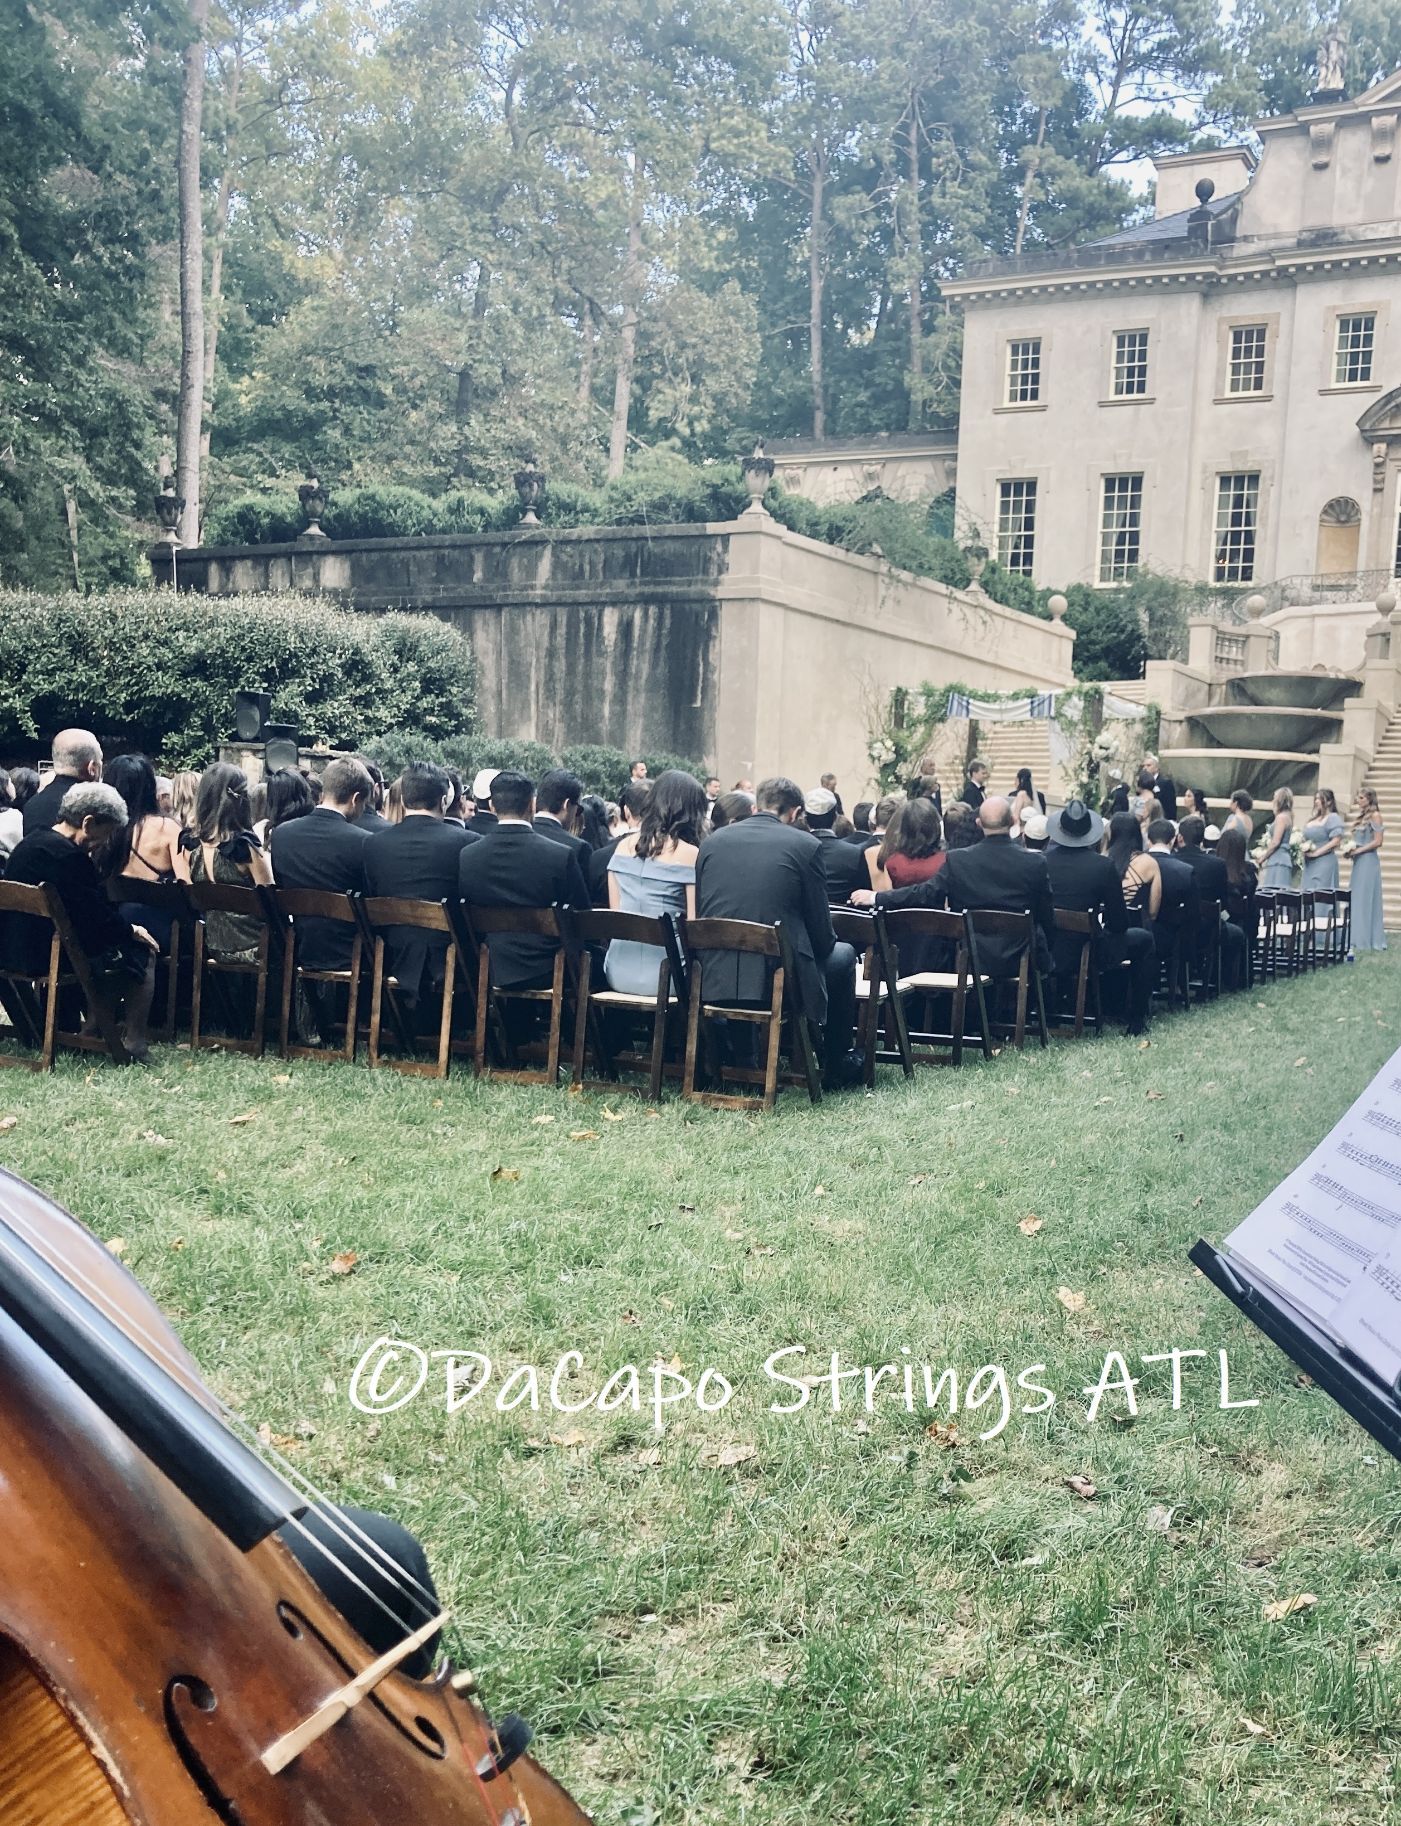 Image for post: DaCapo Strings helped make the ceremony so perfect and personal